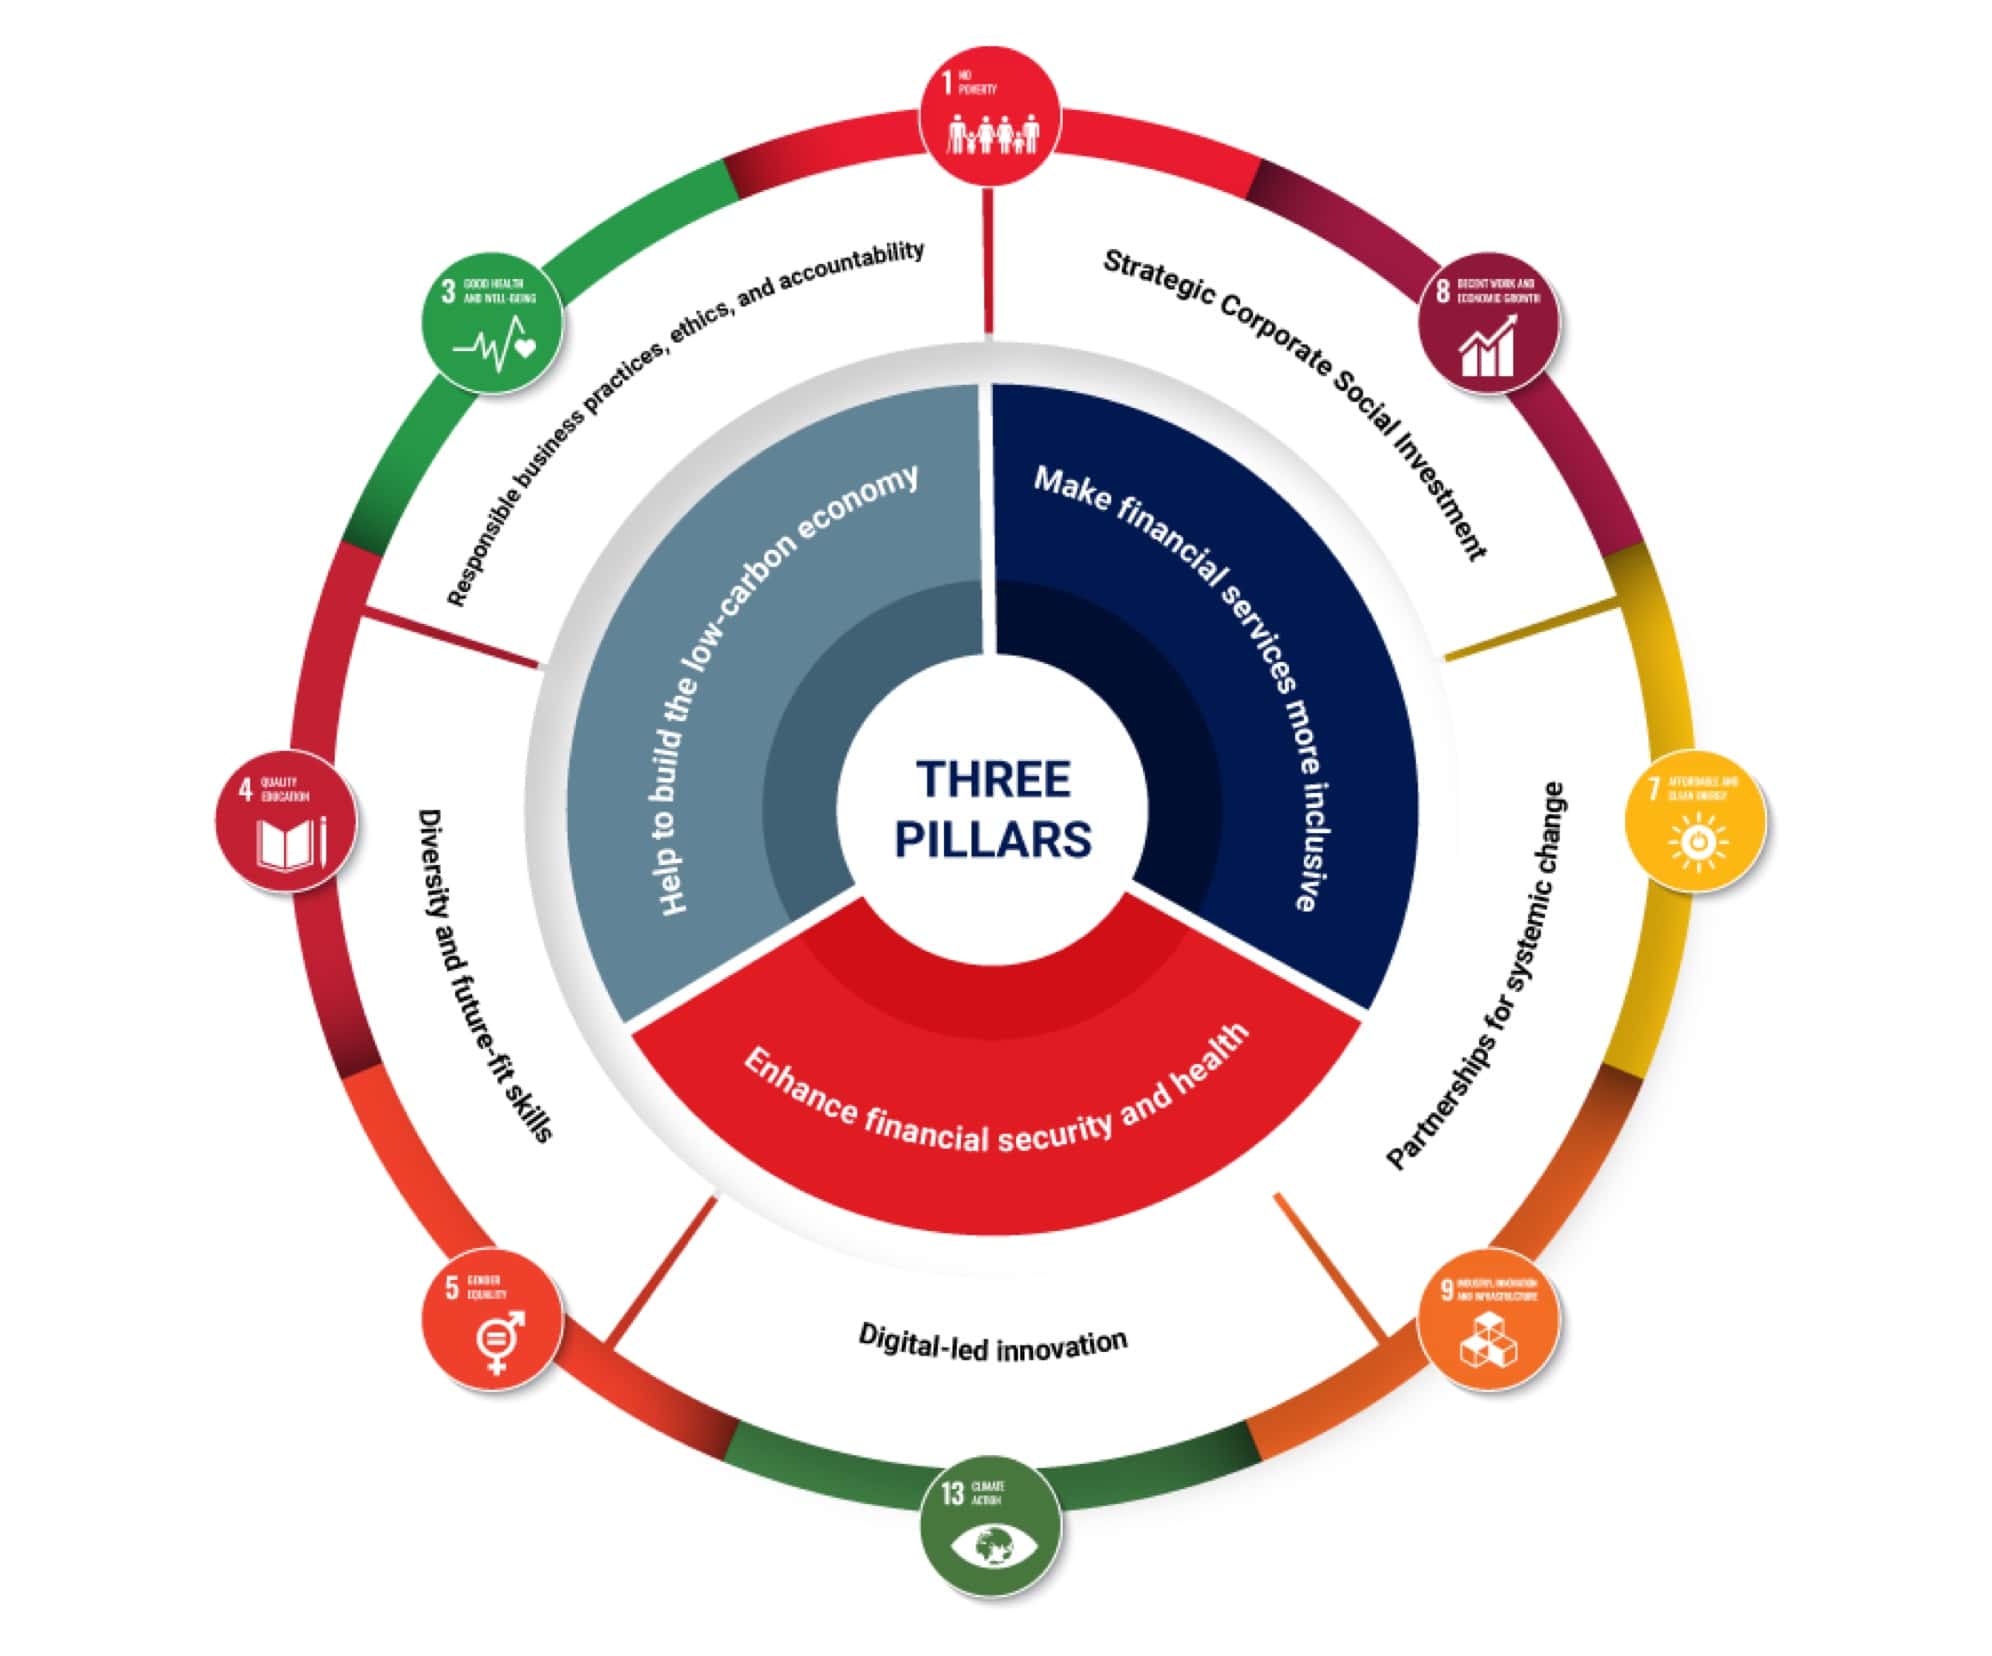  Infographic depicting the 3 pillars of Momentum Group’s sustainability framework.